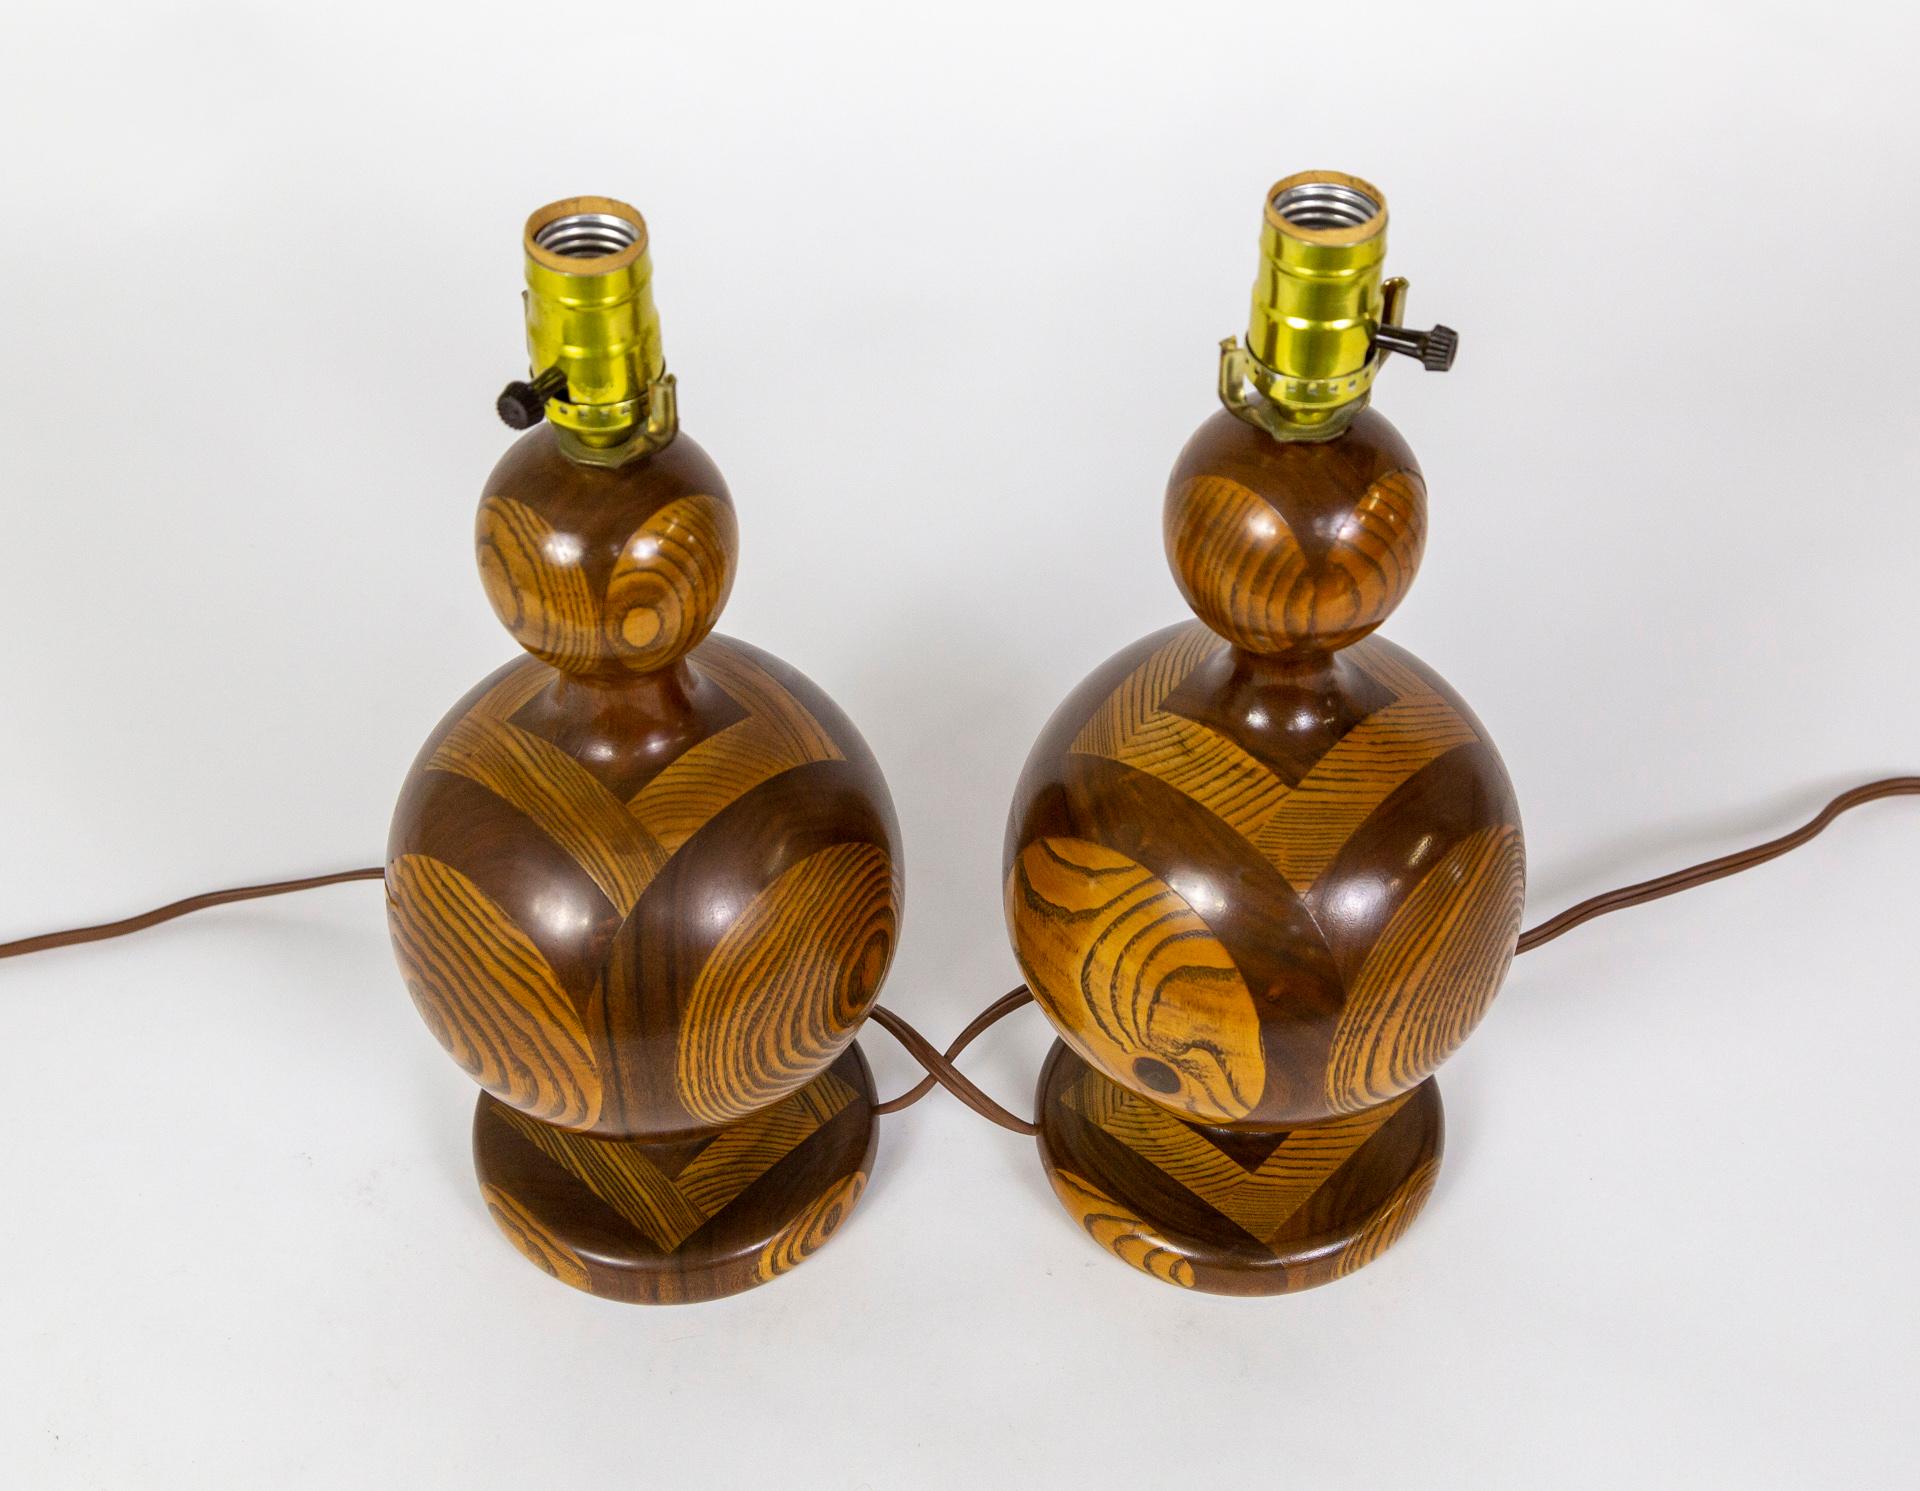 Segmented 'Inlaid-Esque' Turned Walnut/Cherry Wood Lamps, Pair 3